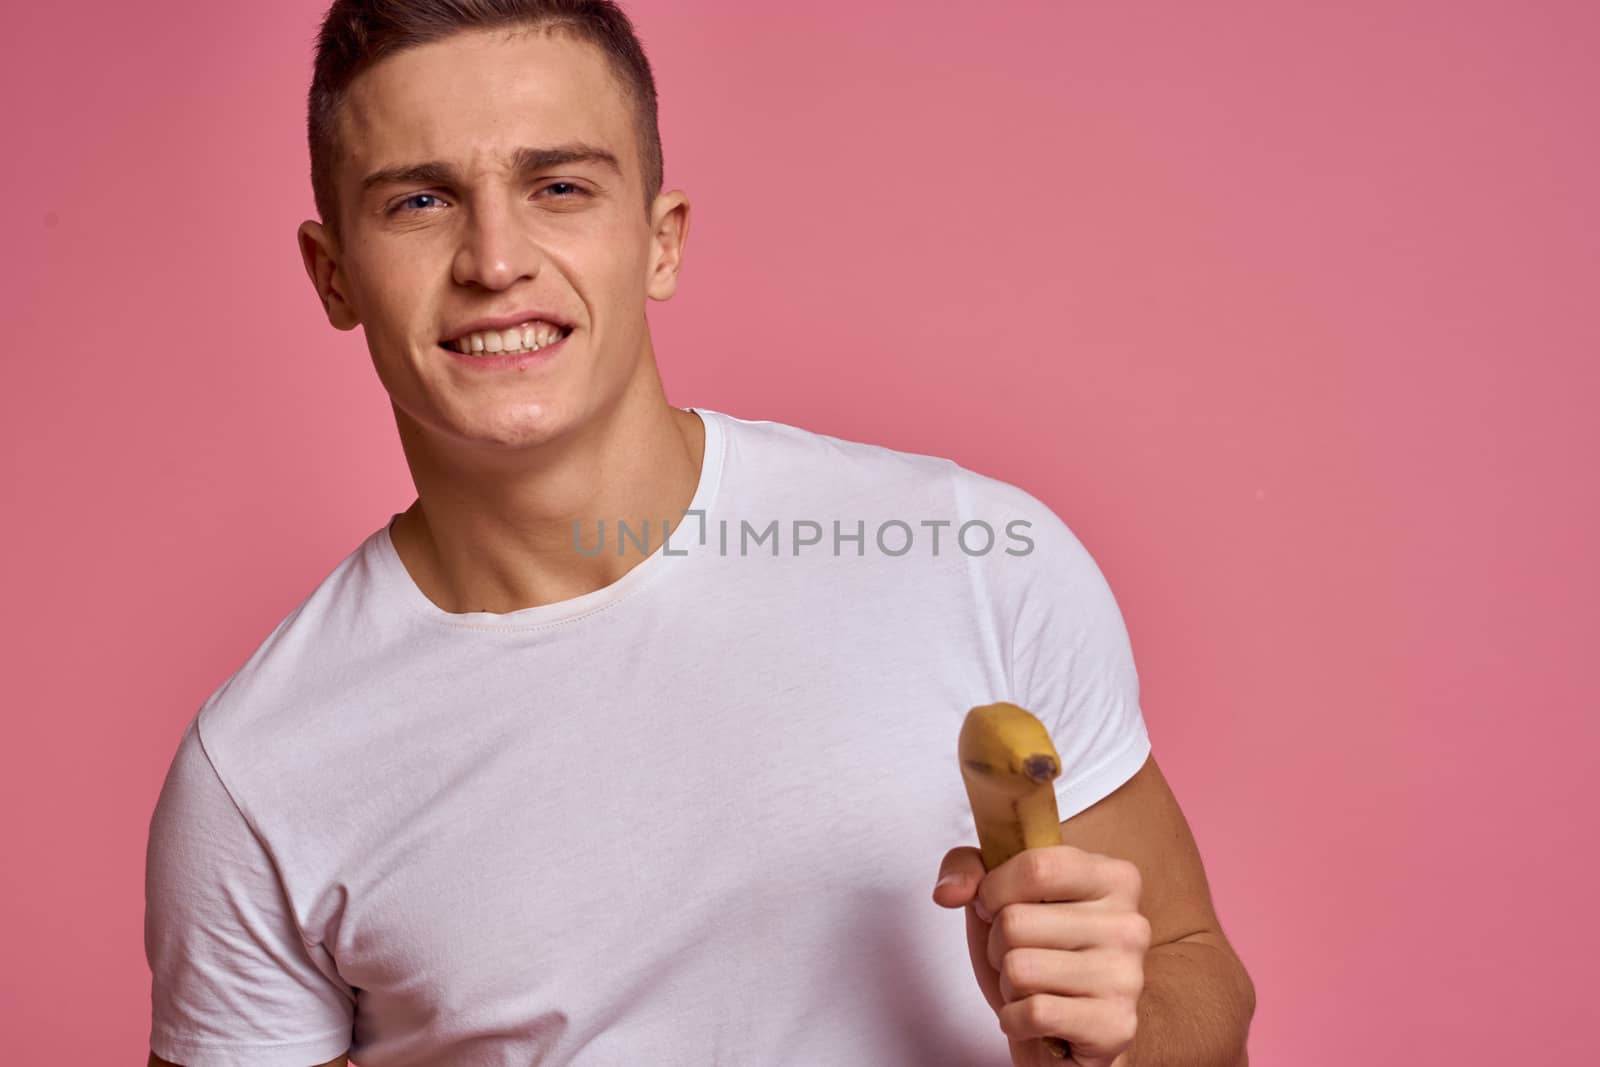 Man with fruits in hands on a pink background healthy food vitamins pink background white t-shirt model. High quality photo